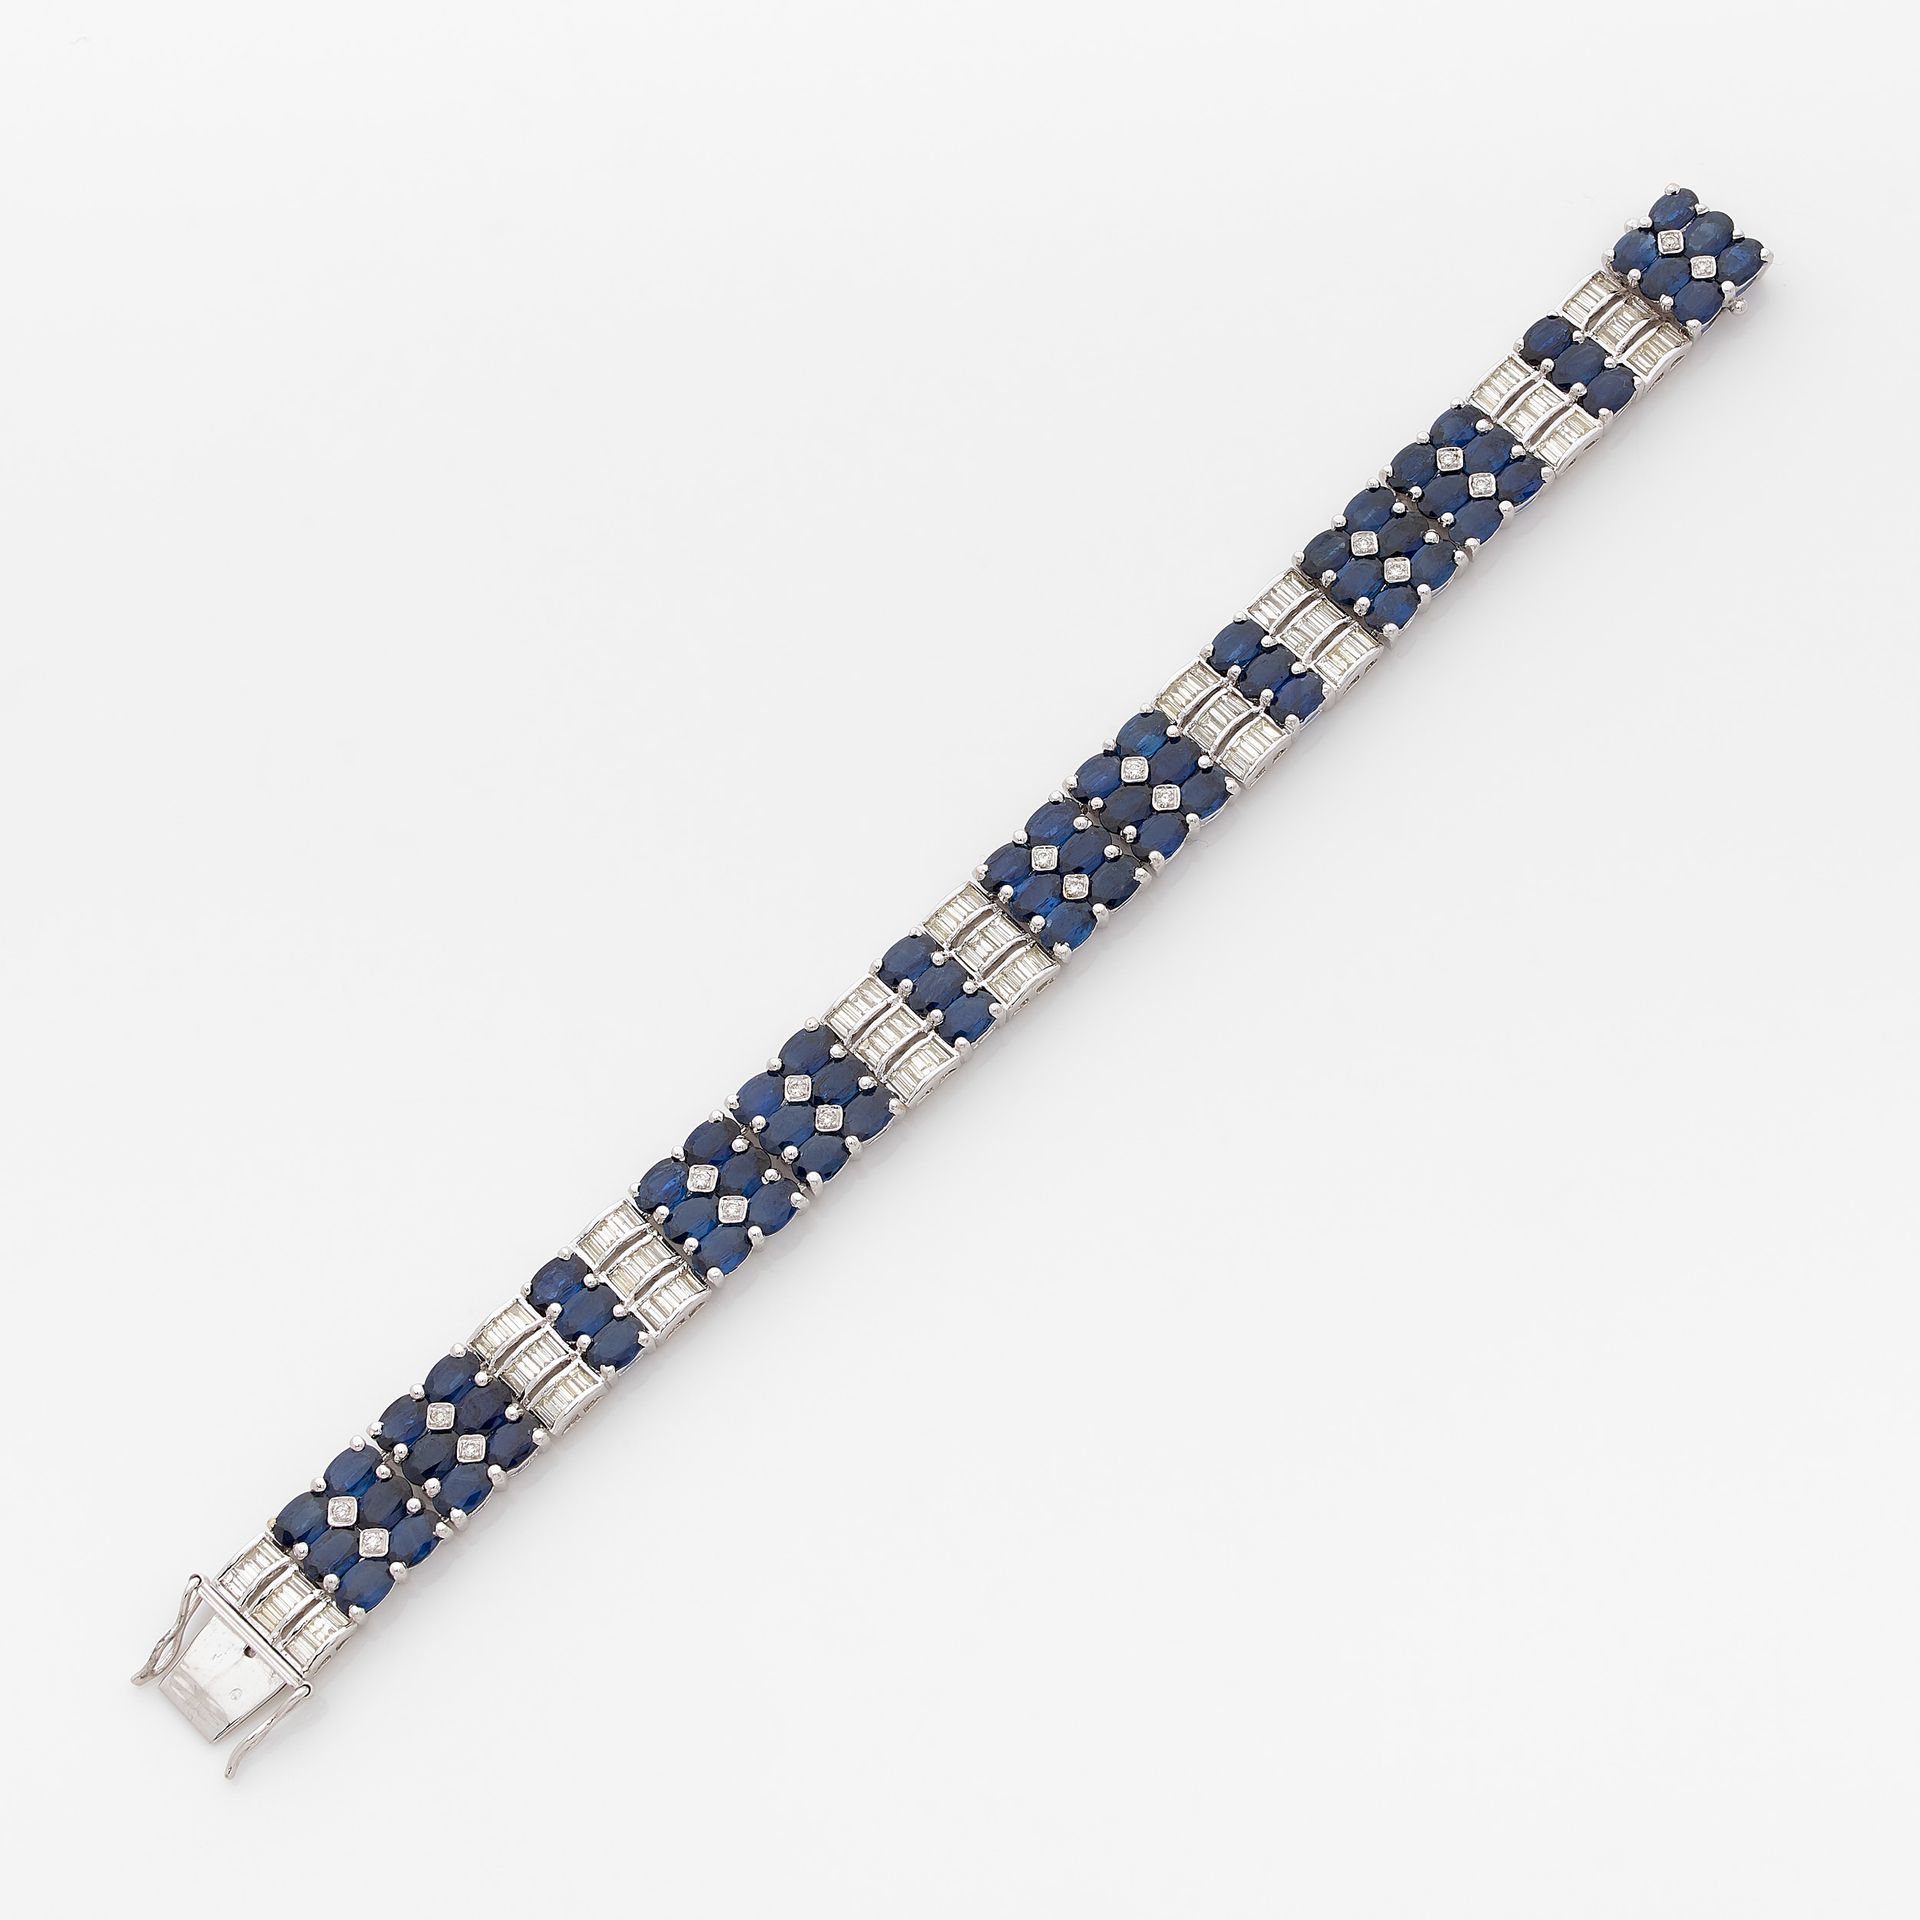 Null RIBBON BRACELET

in white gold, in three rows of oval sapphires alternated &hellip;